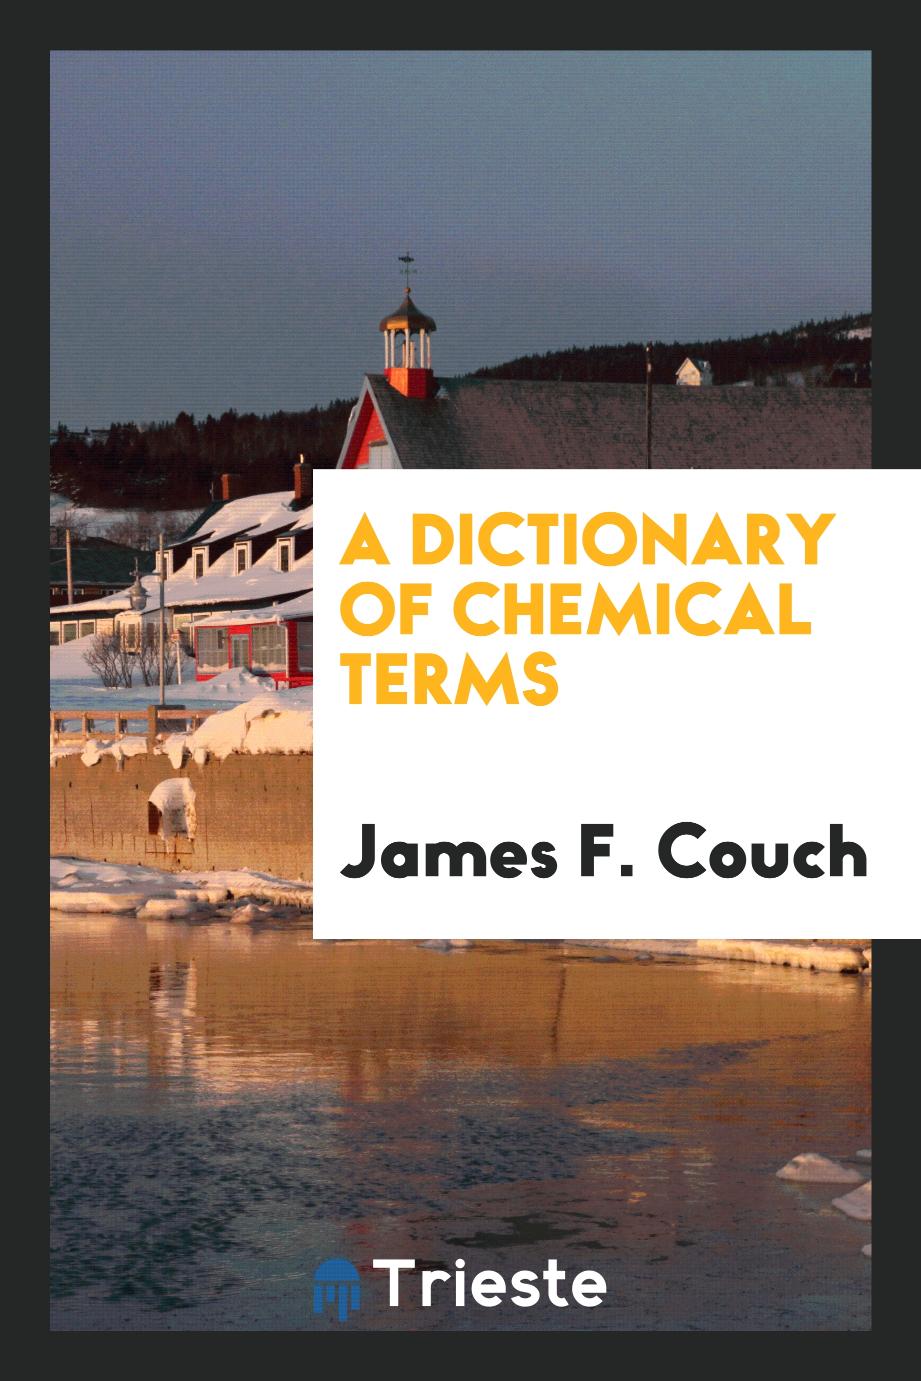 A dictionary of chemical terms